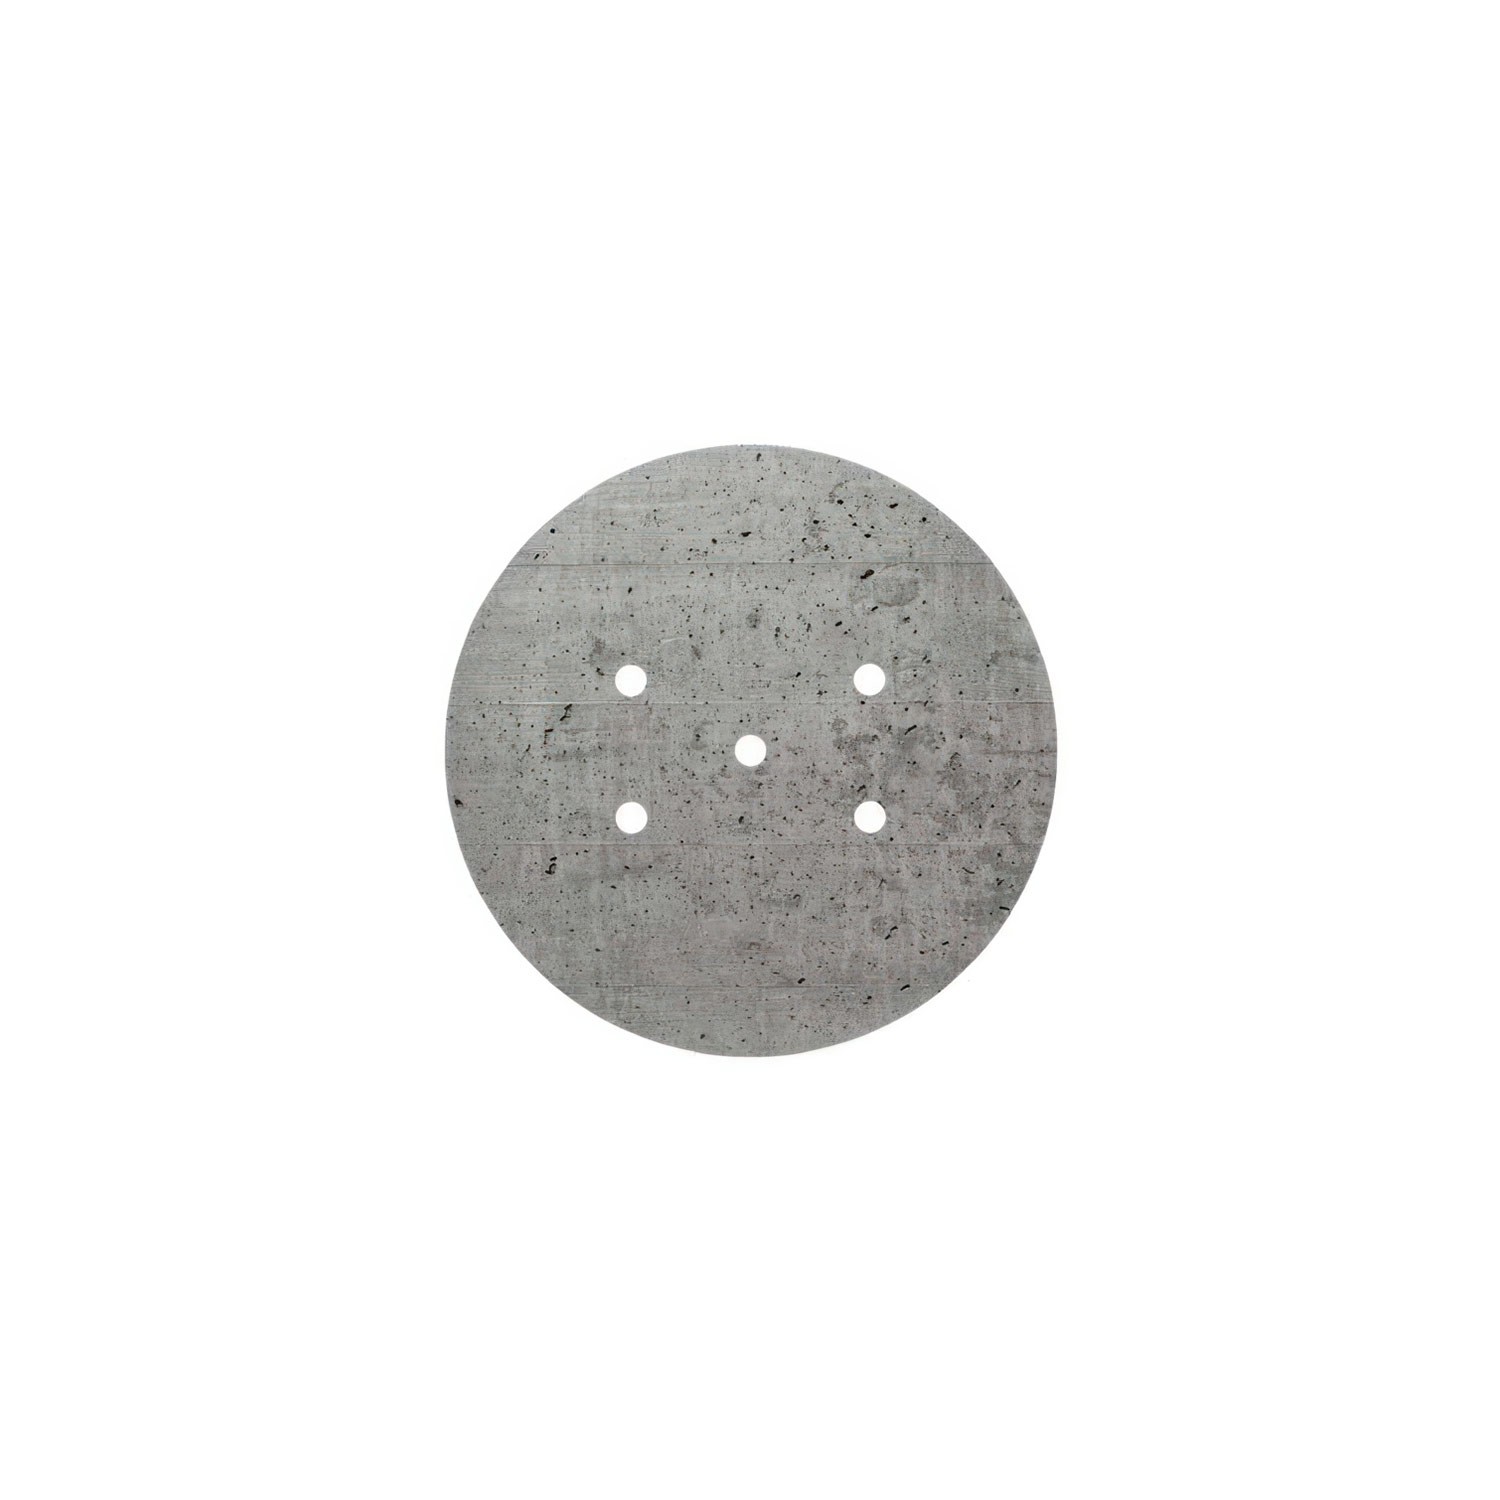 200 mm diameter round pre-drilled Panel for Rose-One System